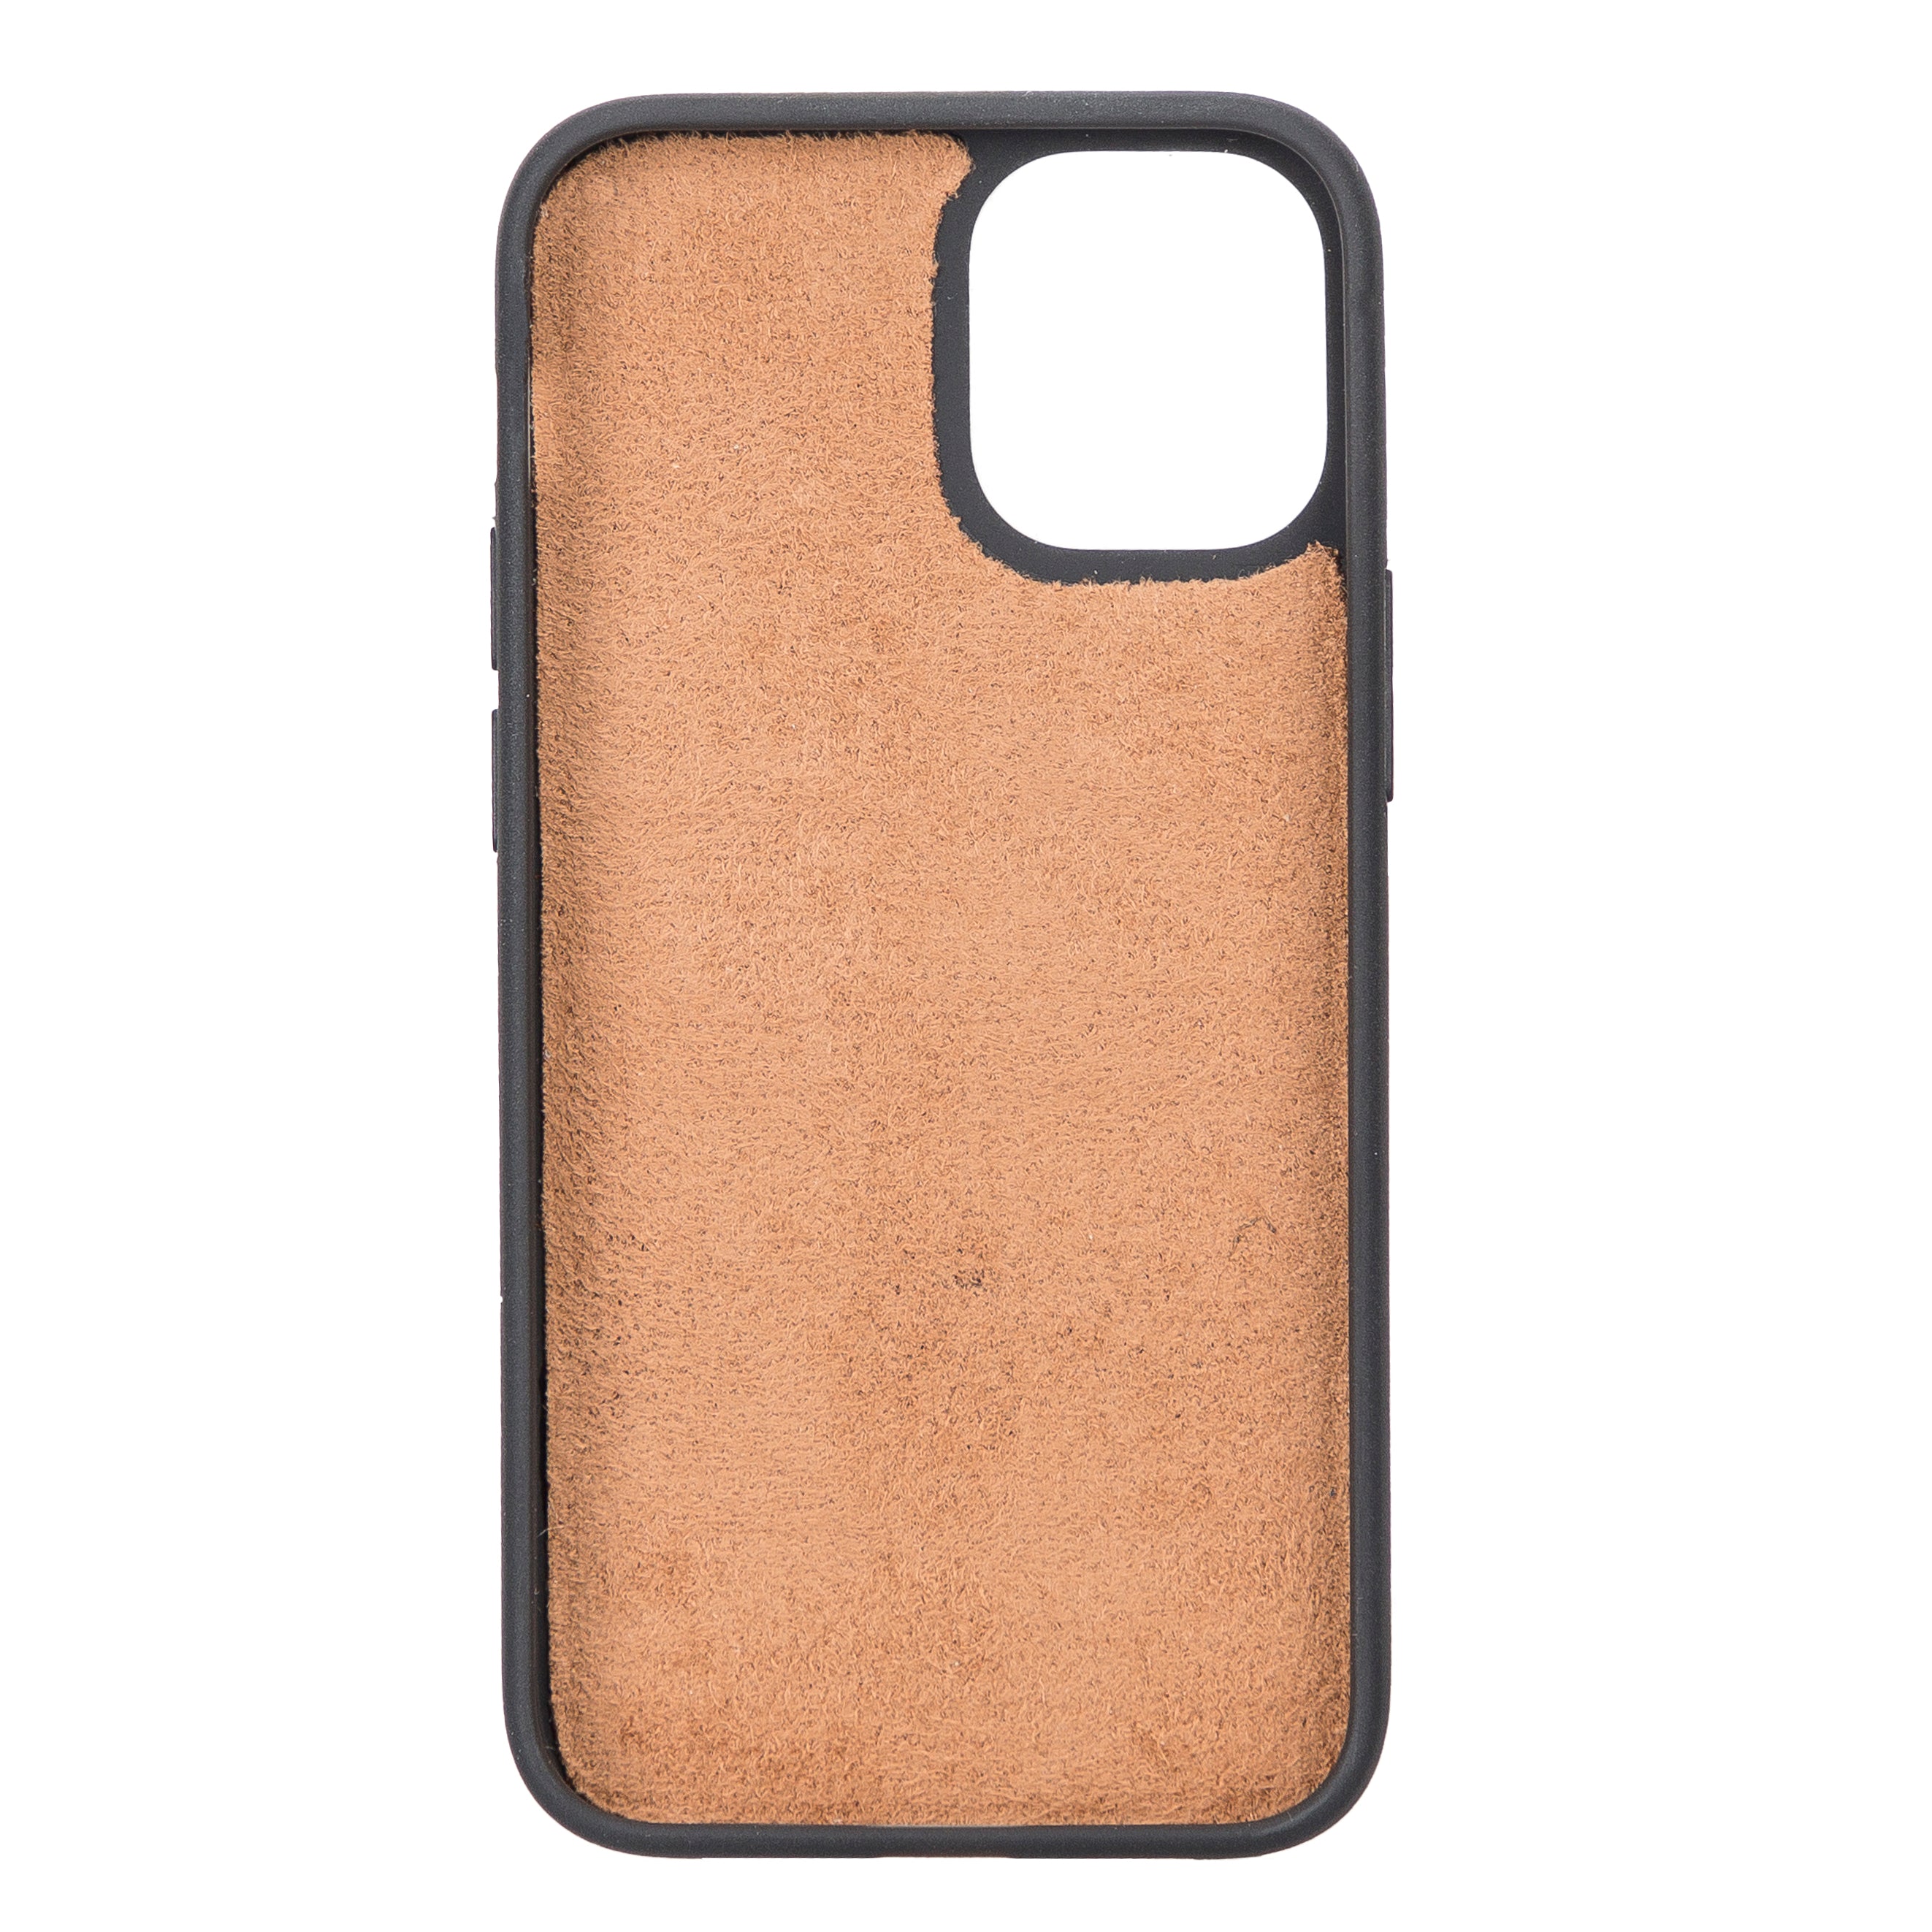 DelfiCase Leather Magnetic Detachable Wallet Case for iPhone 12 Mini (5.4") 34